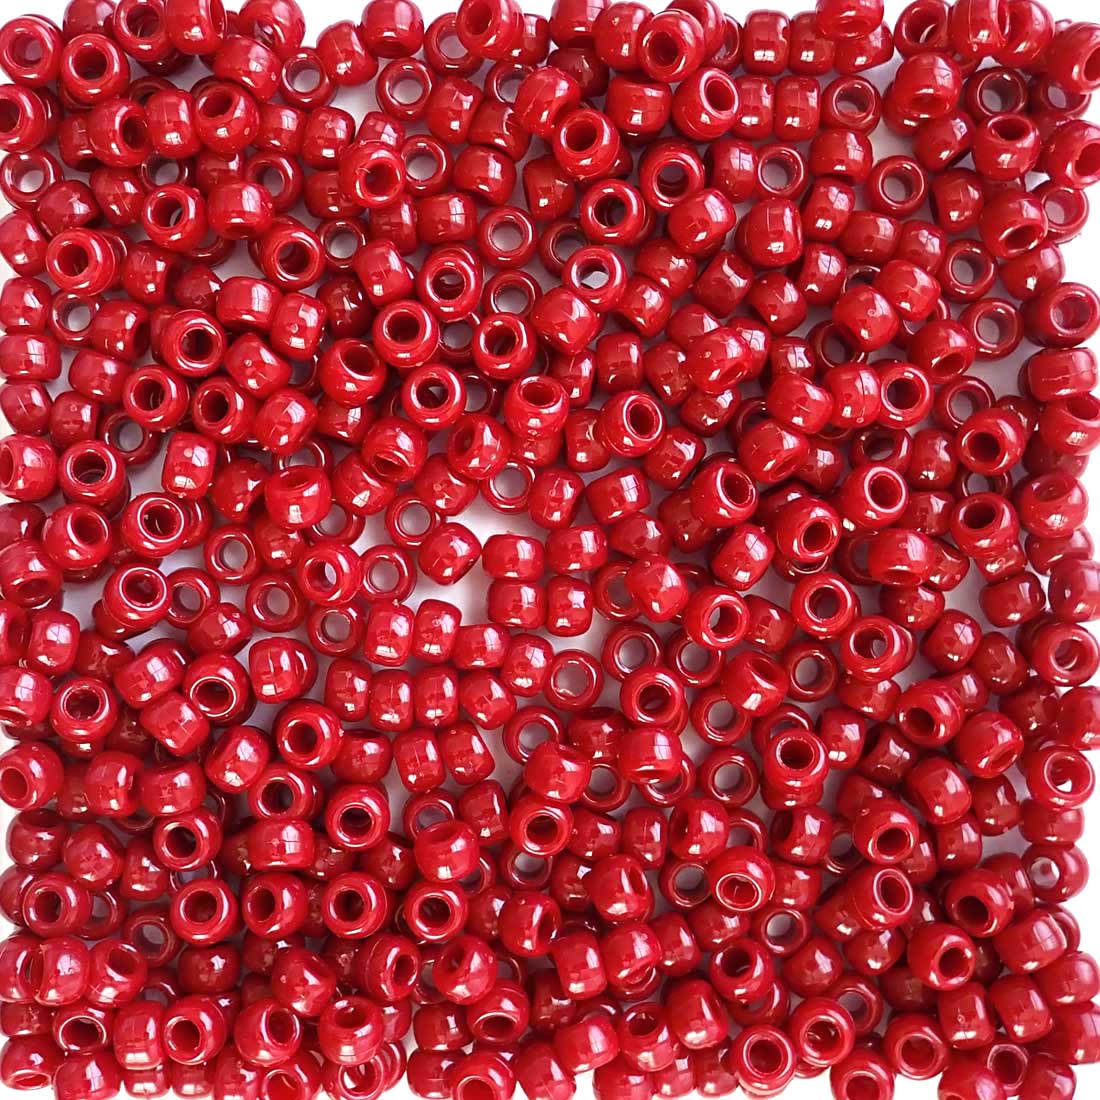 Red Plastic Pony Beads. Size 6 x 9 mm. Craft Beads.